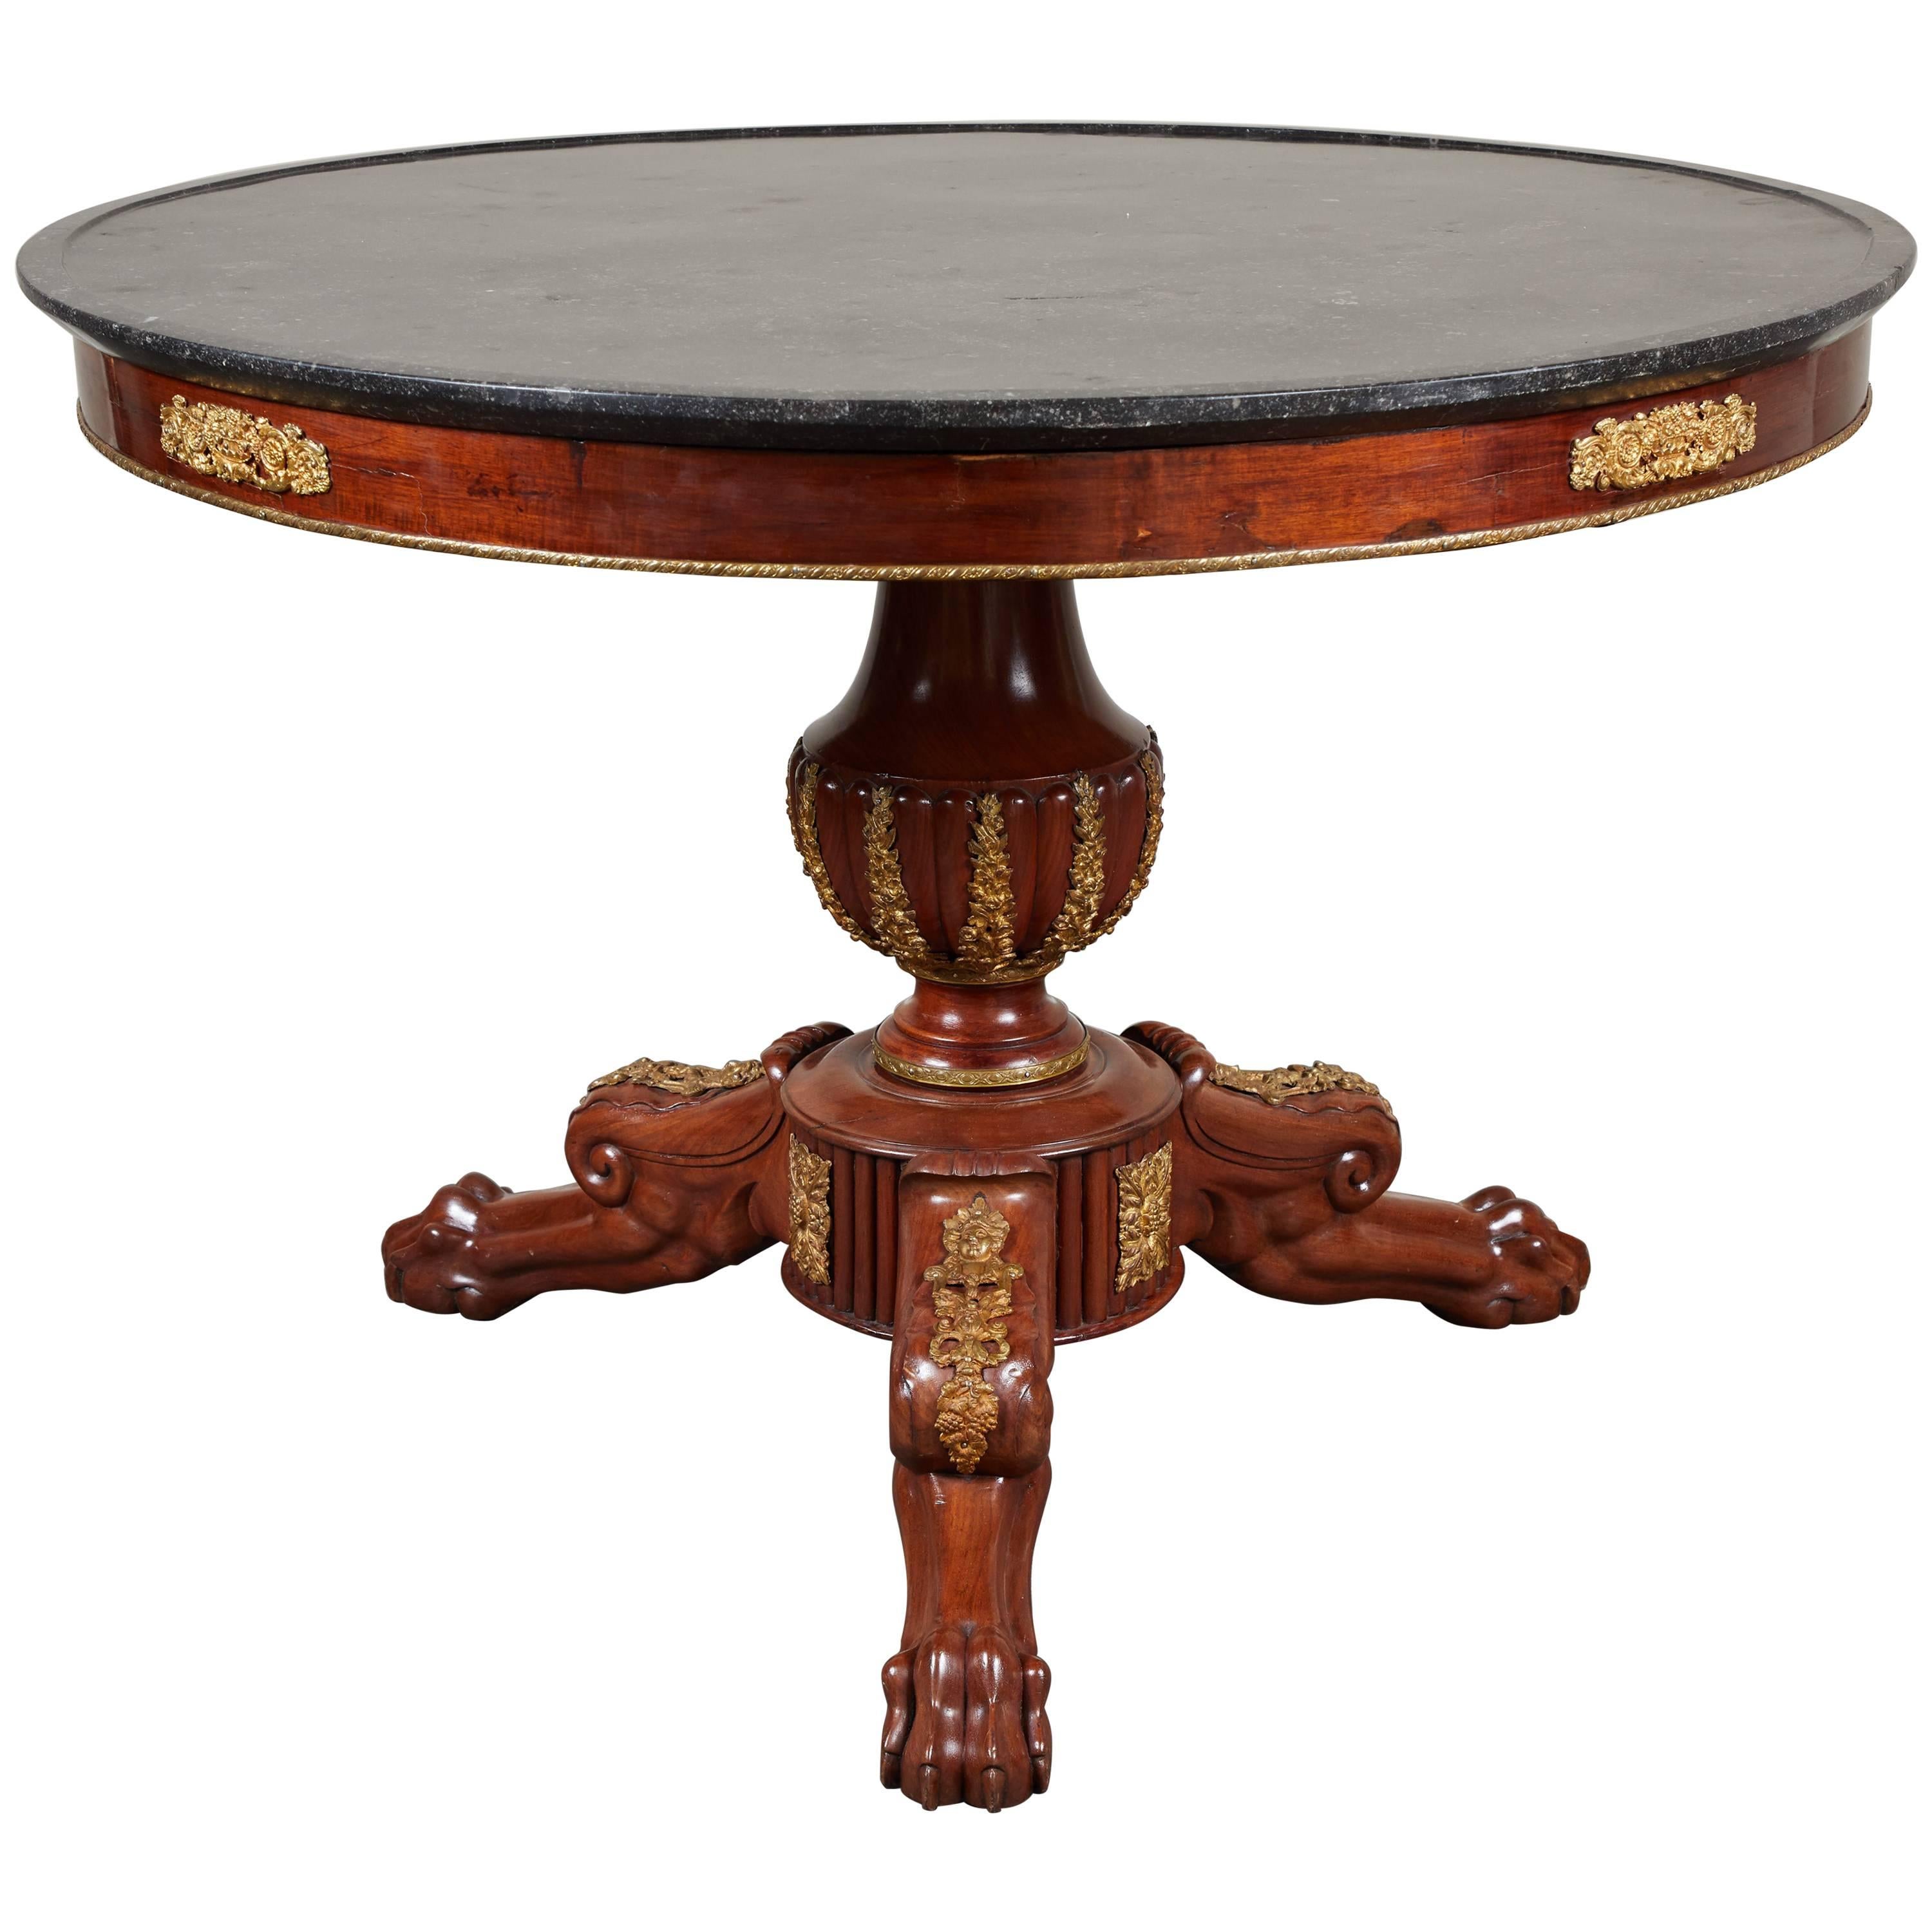 Early 19th Century French Empire Mahogany Pedestal Table with Ormolu